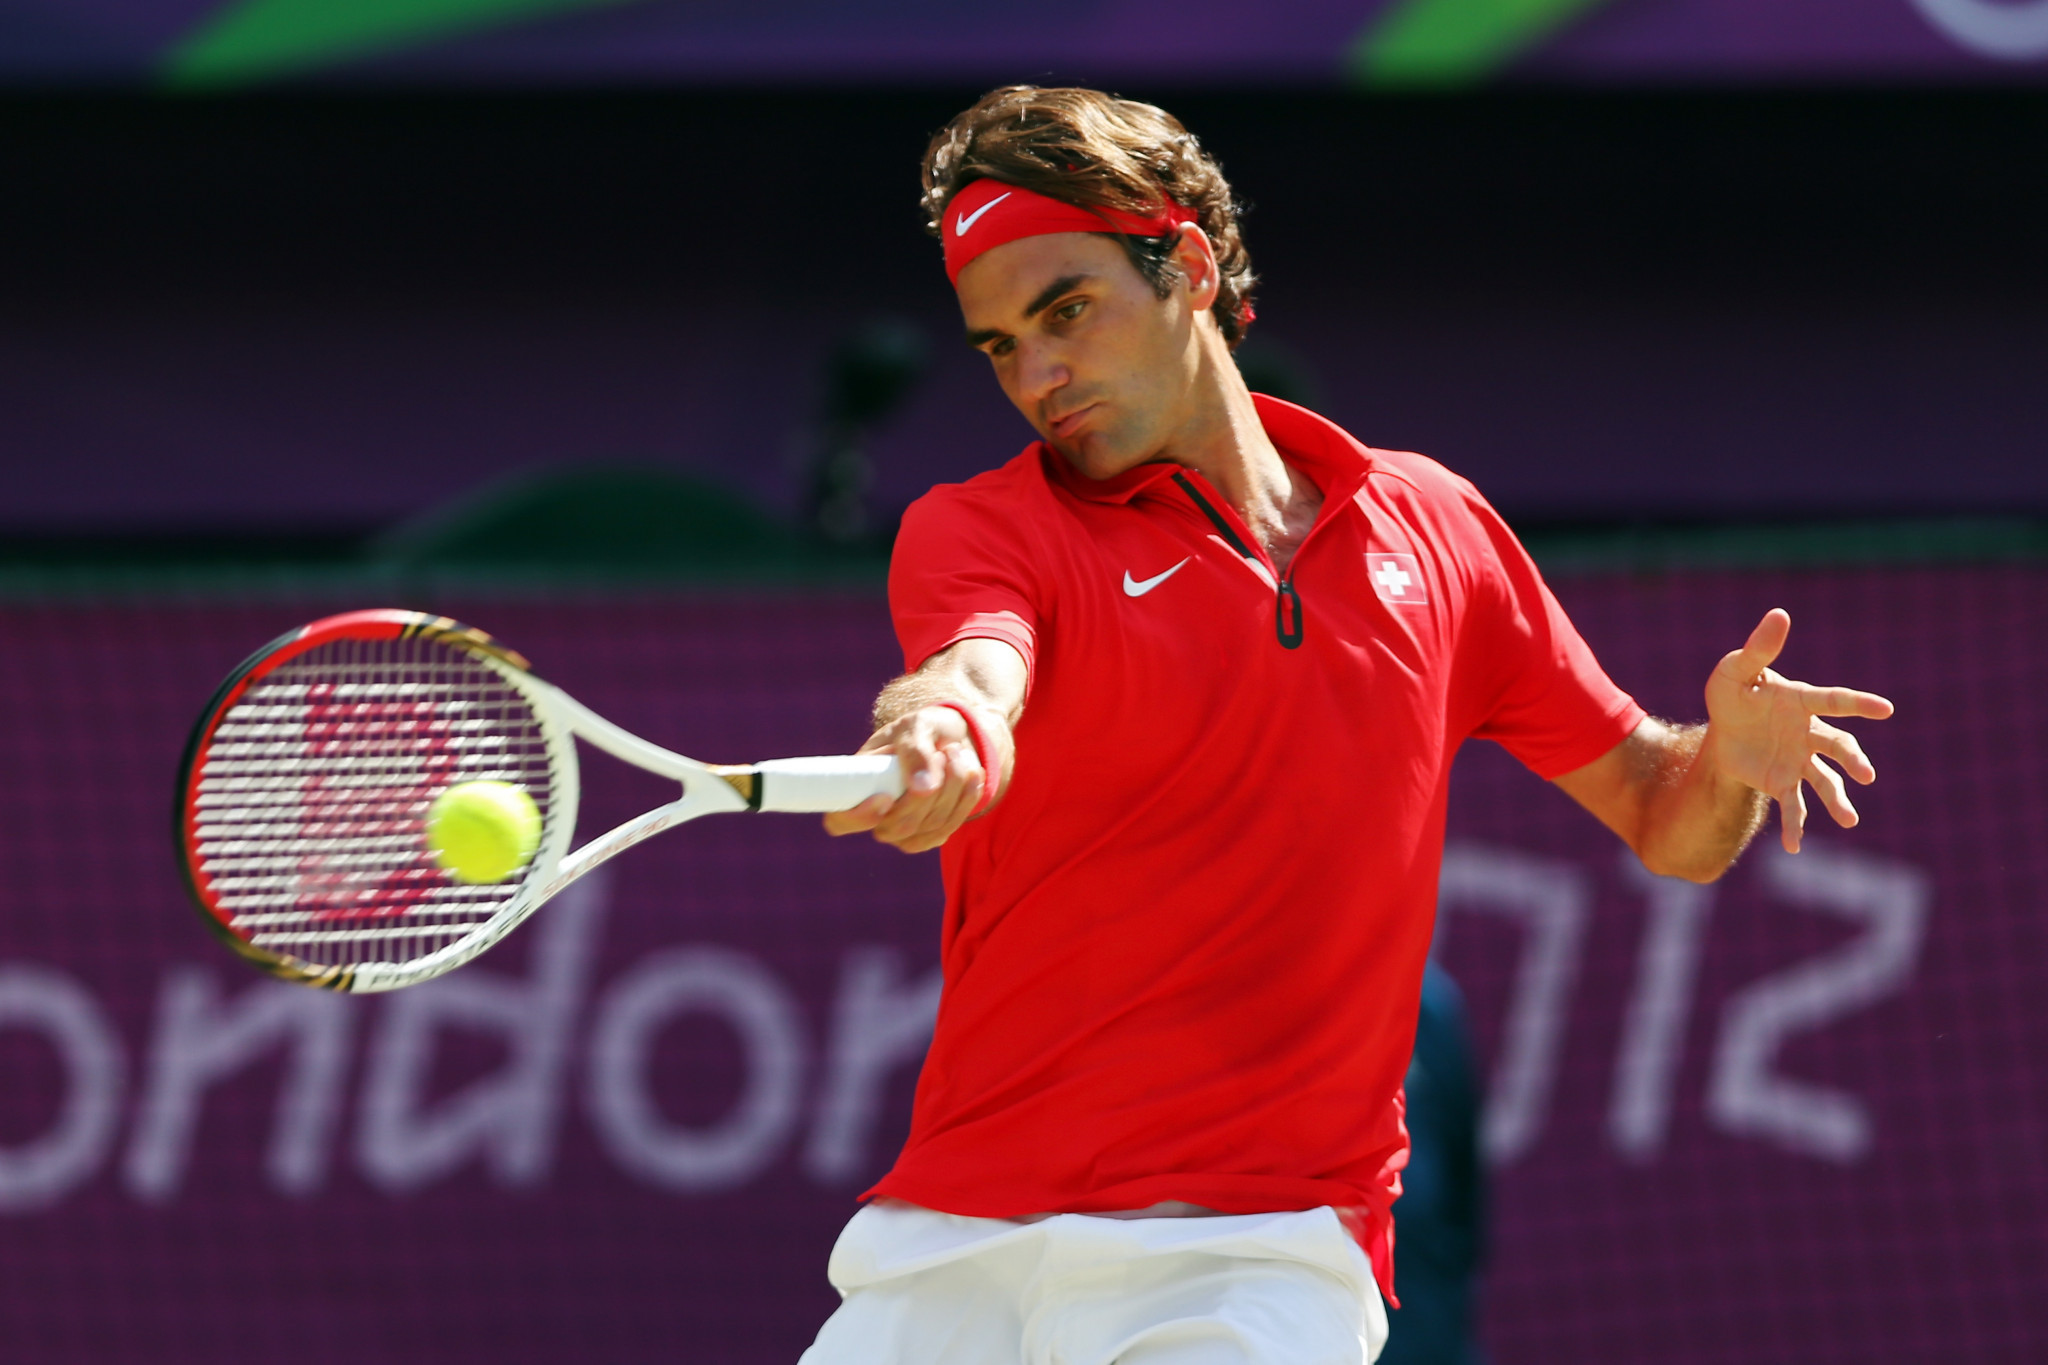 Roger Federer earned an Olympic silver medal in the singles competition at London 2012 ©Getty Images